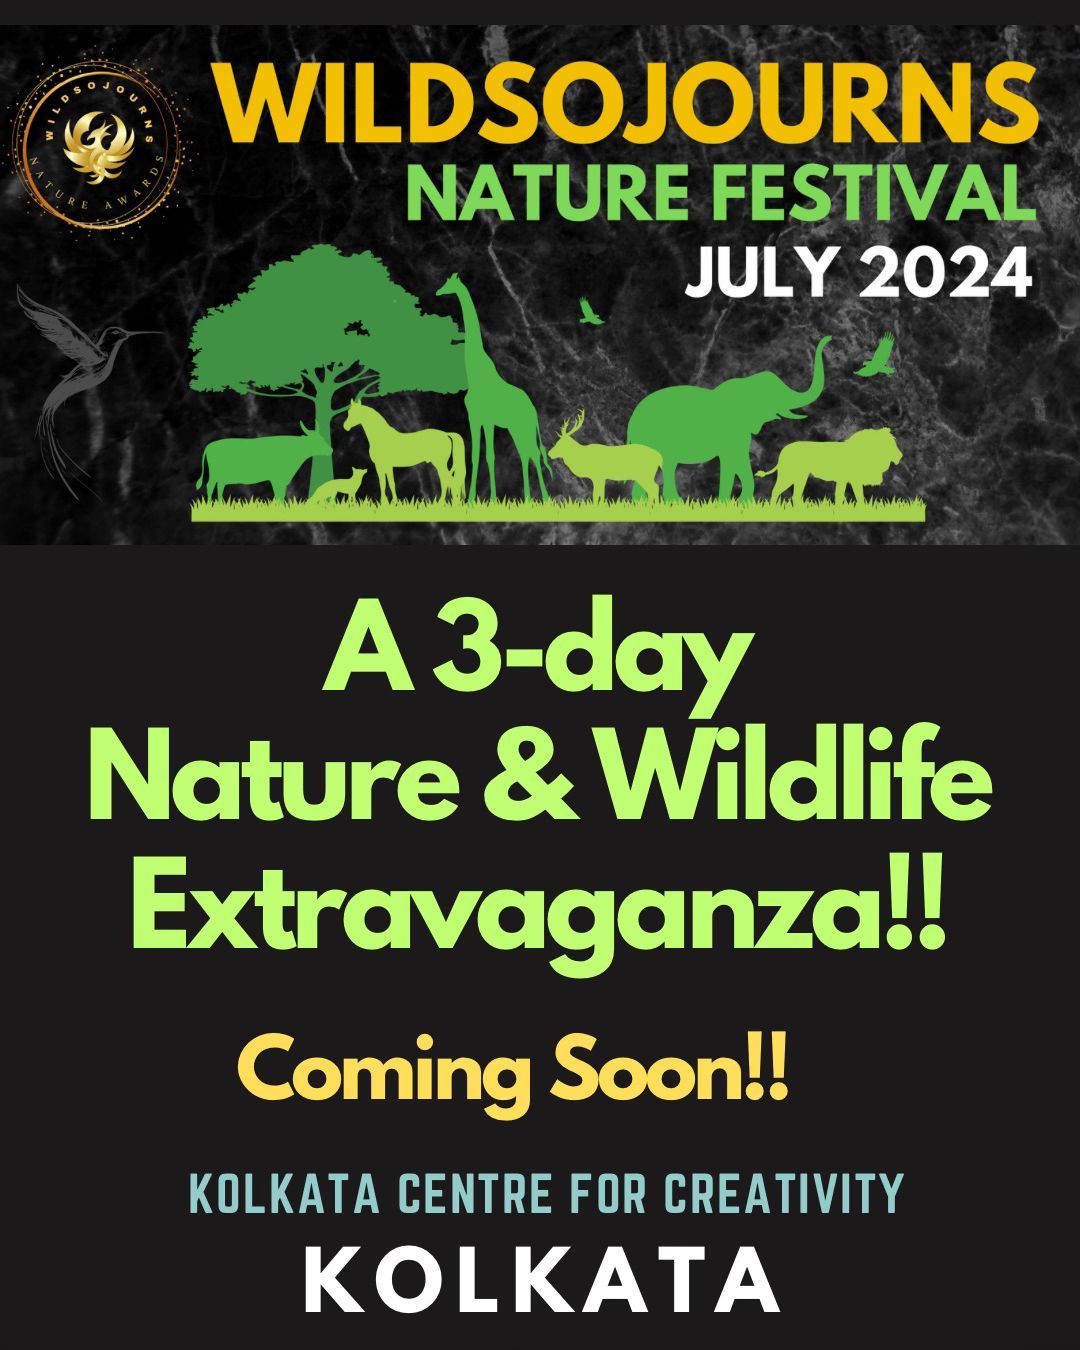 WildSojourns Nature Festival